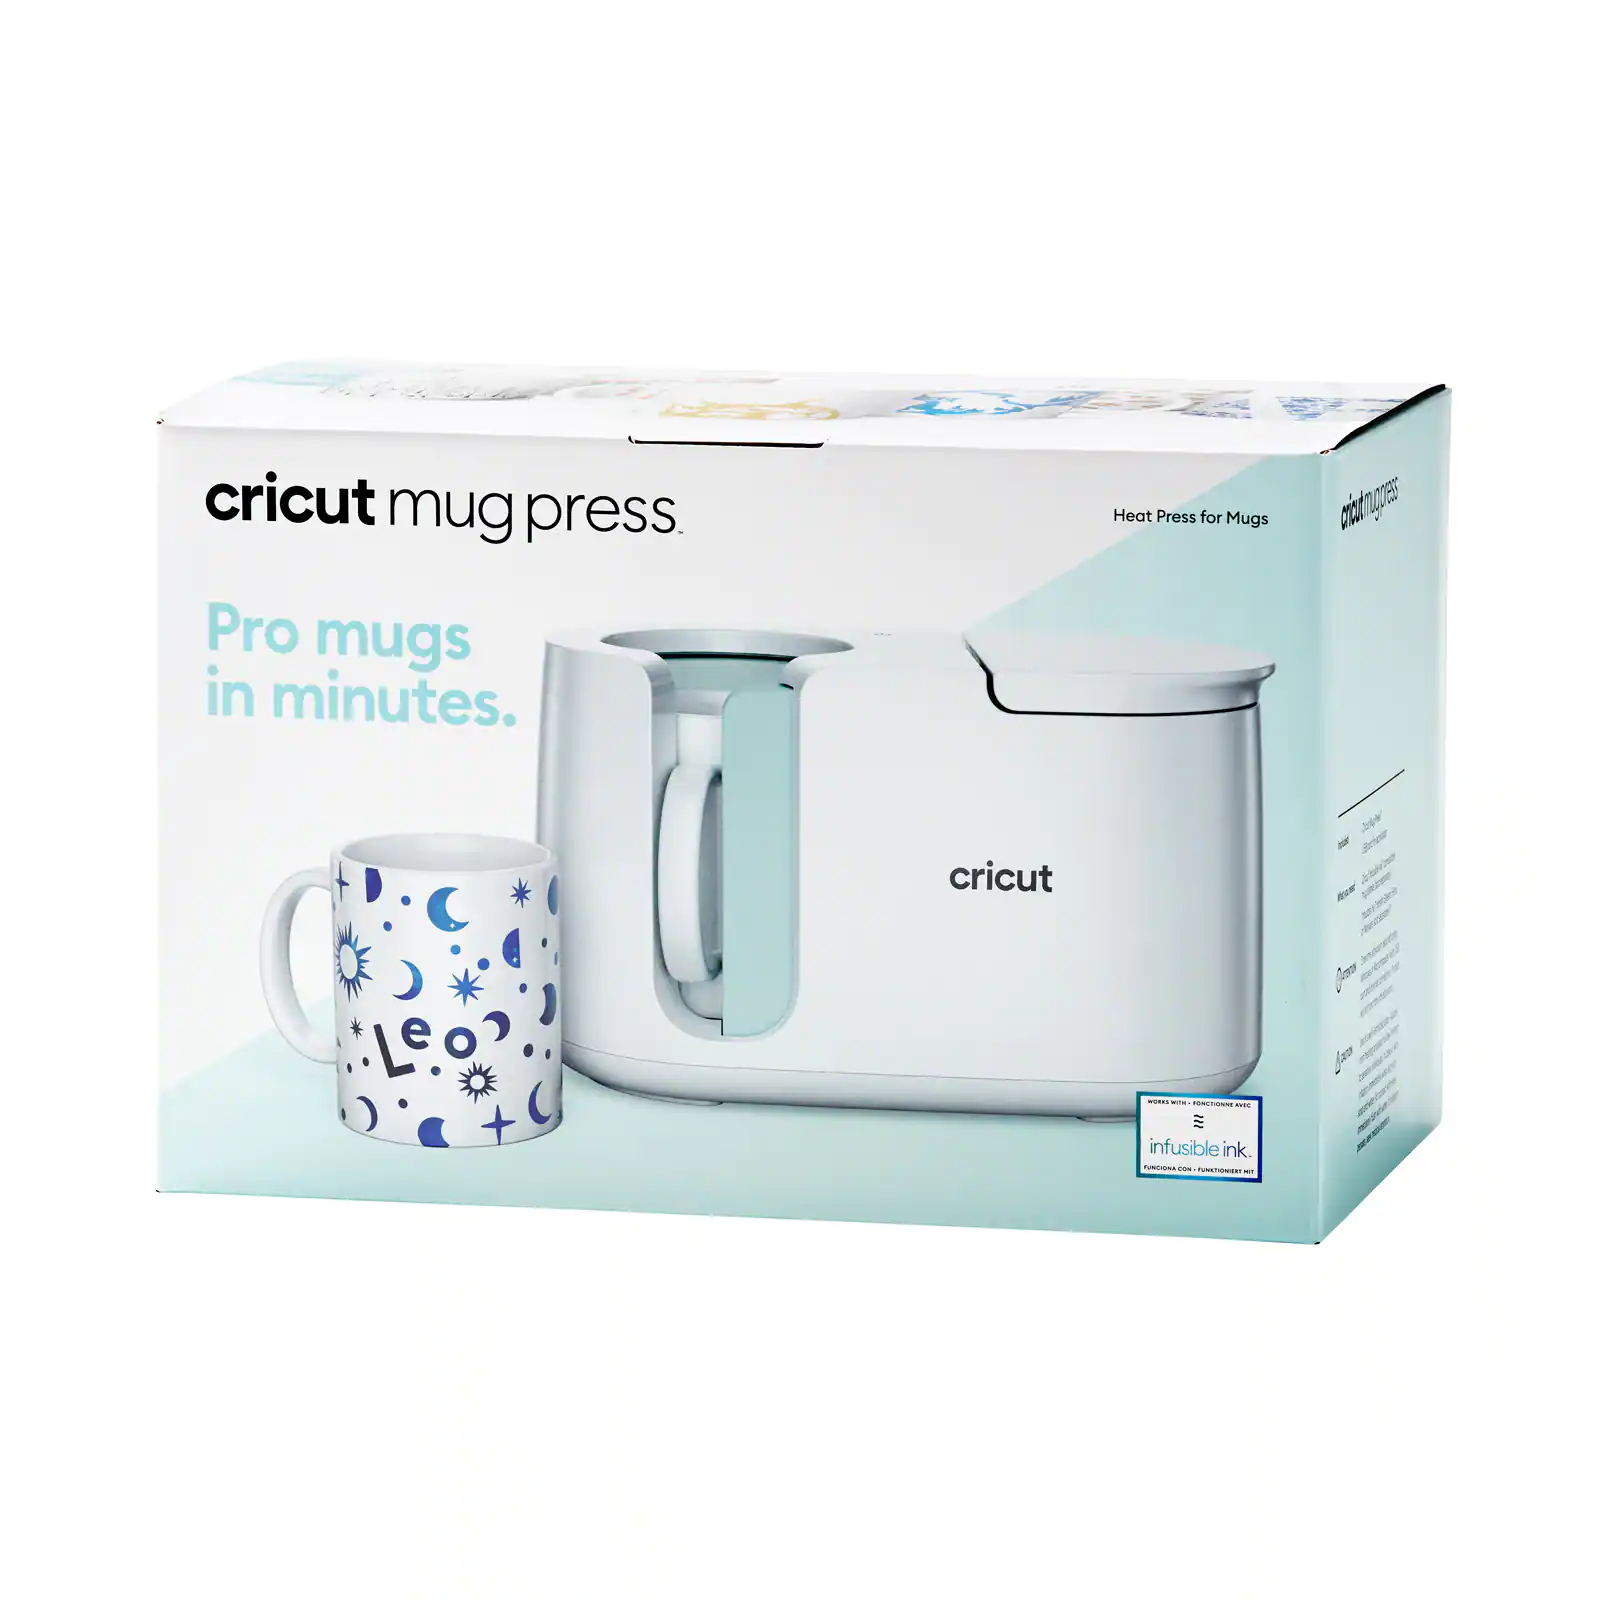 Cricut Mug Press US， Heat Press for Sublimation Mug Projects， One-Touch Setting， For Infusible Ink Materials and Mug Blanks 11 oz - 16 oz (Sold Separately)， Includes Auto-Off Safety Feature